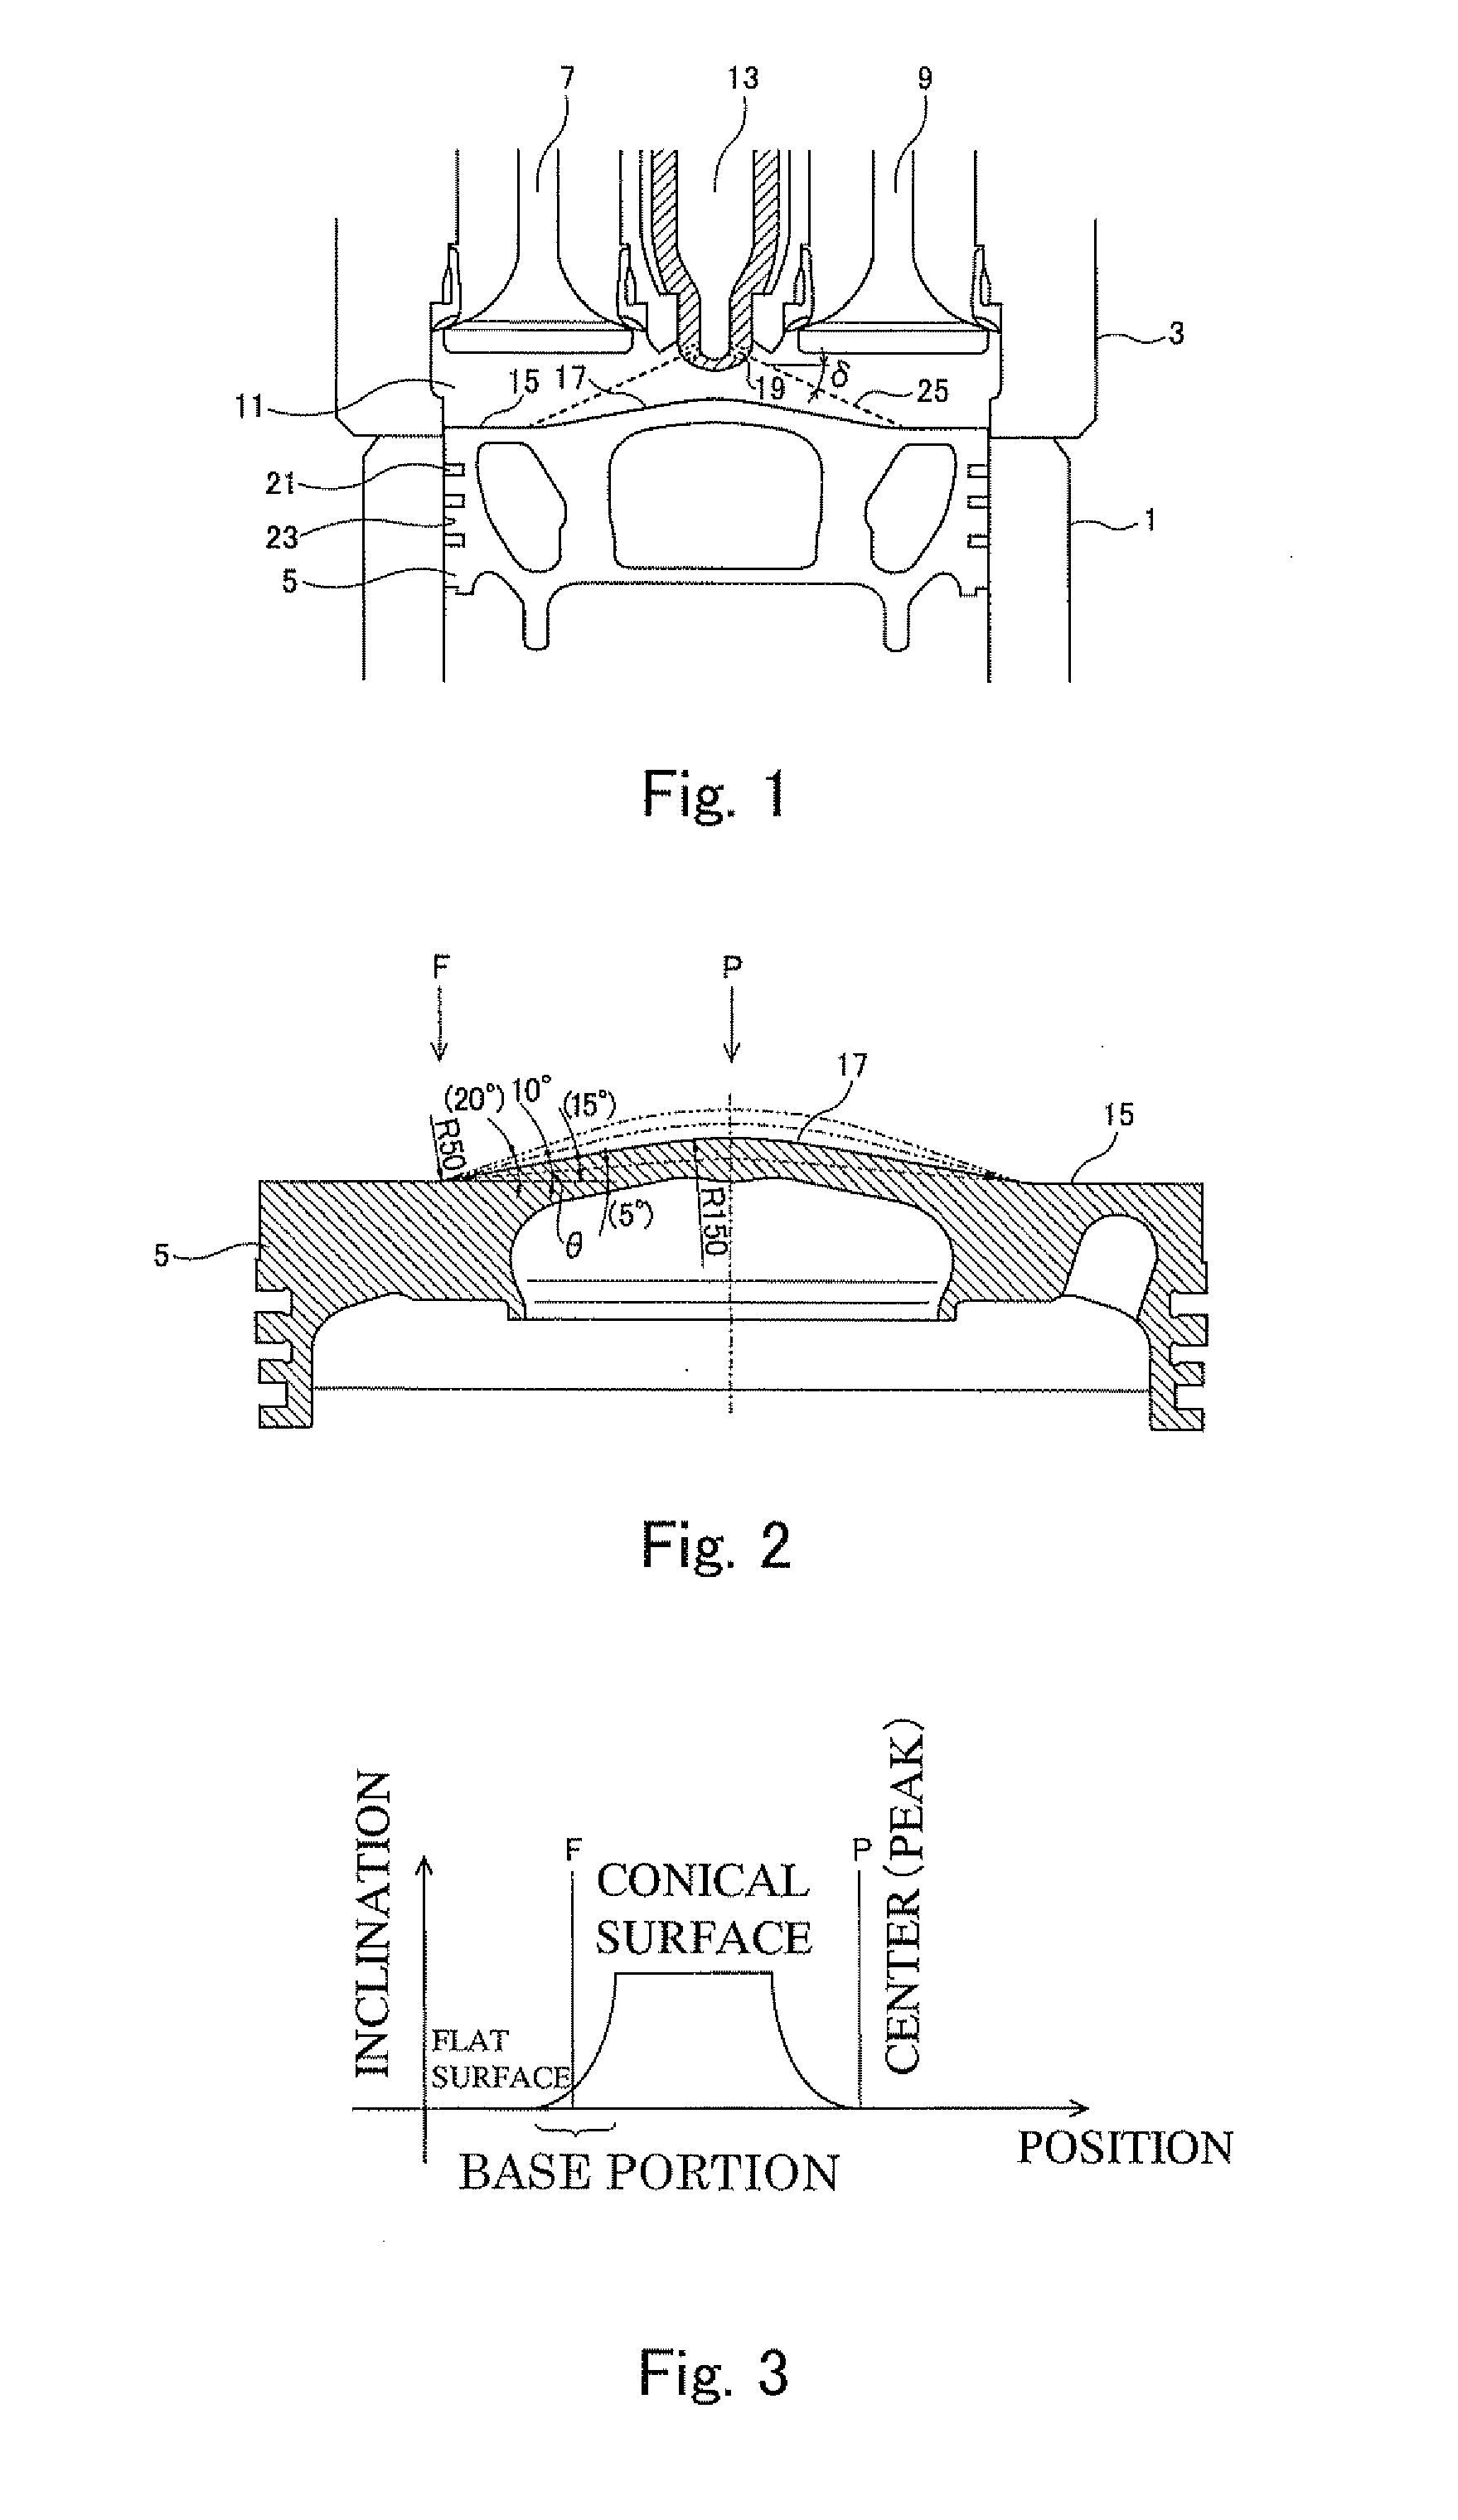 Combustion chamber for large gas engine